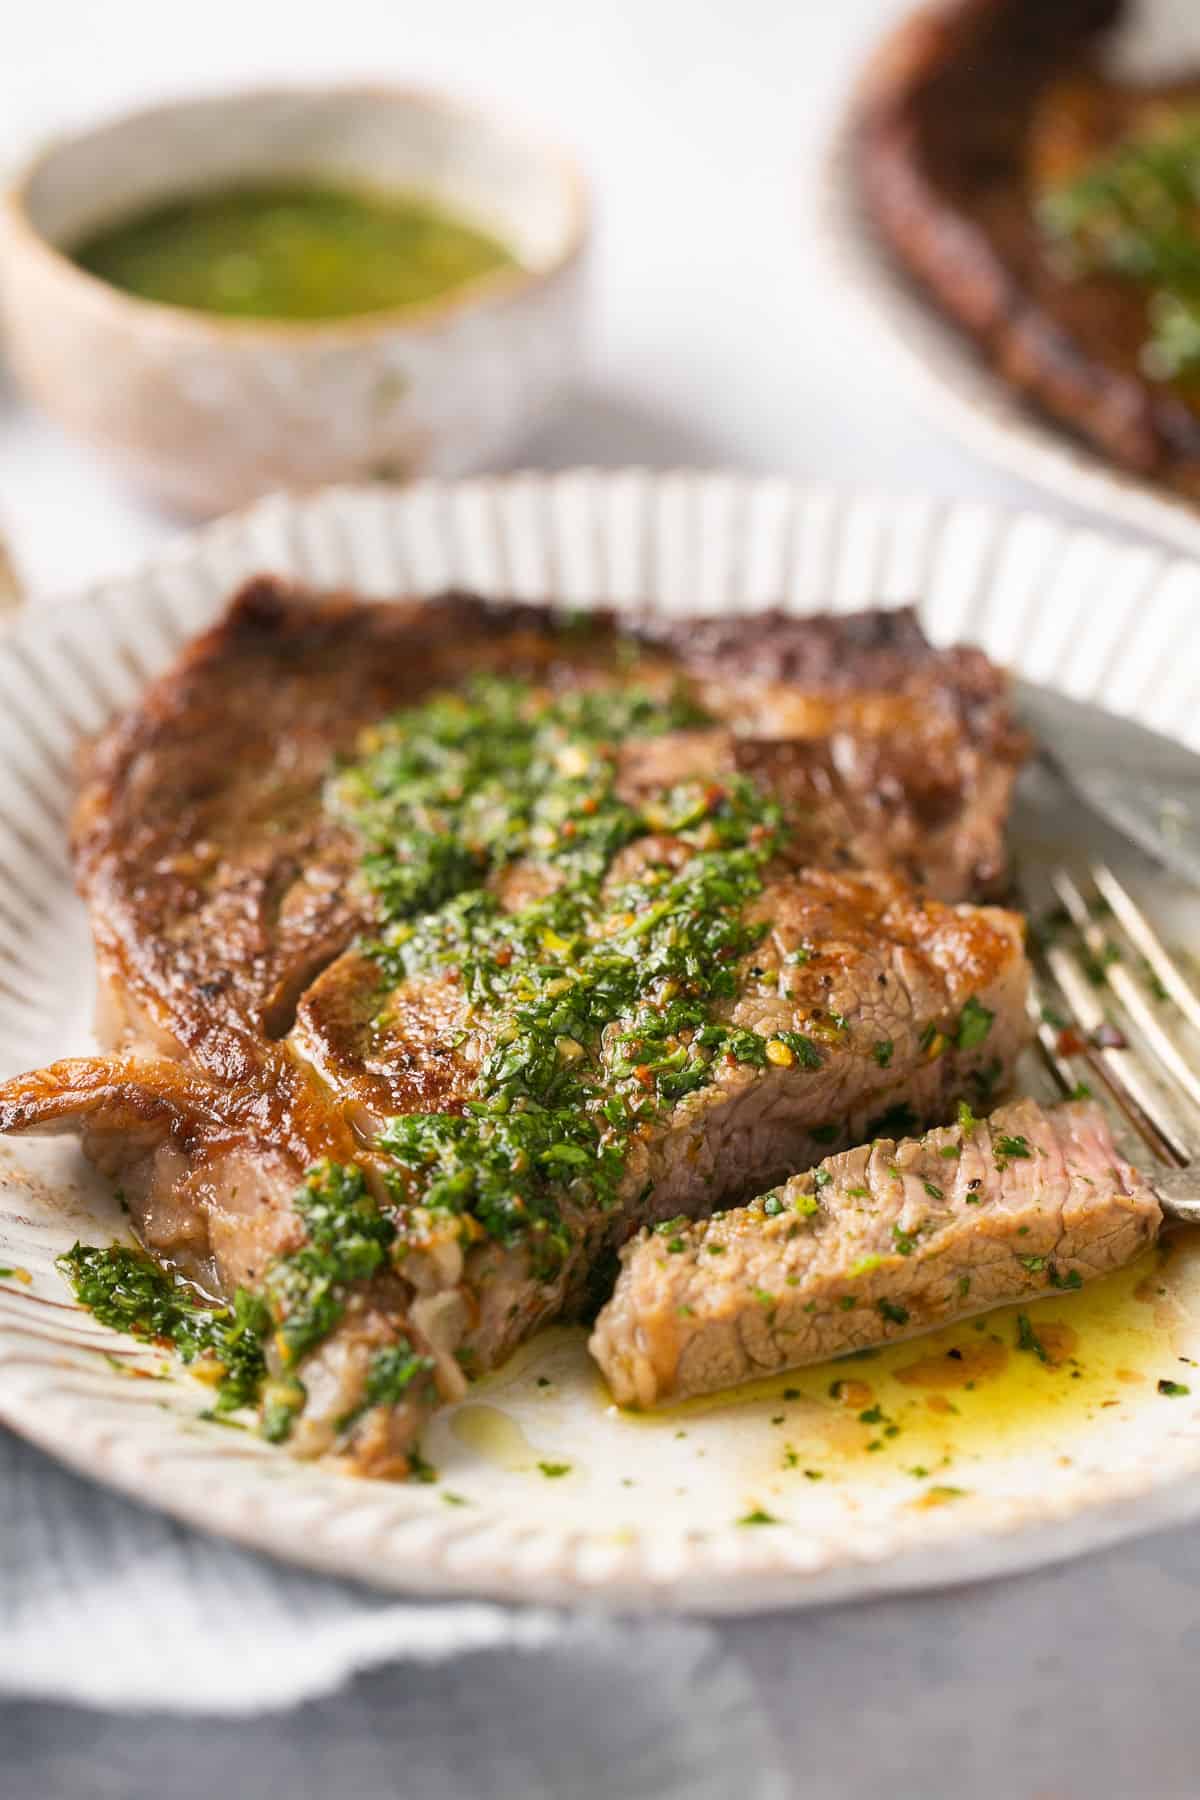 A piece of steak on a white plate with chimichurri sauce on it and a fork beside the steak.